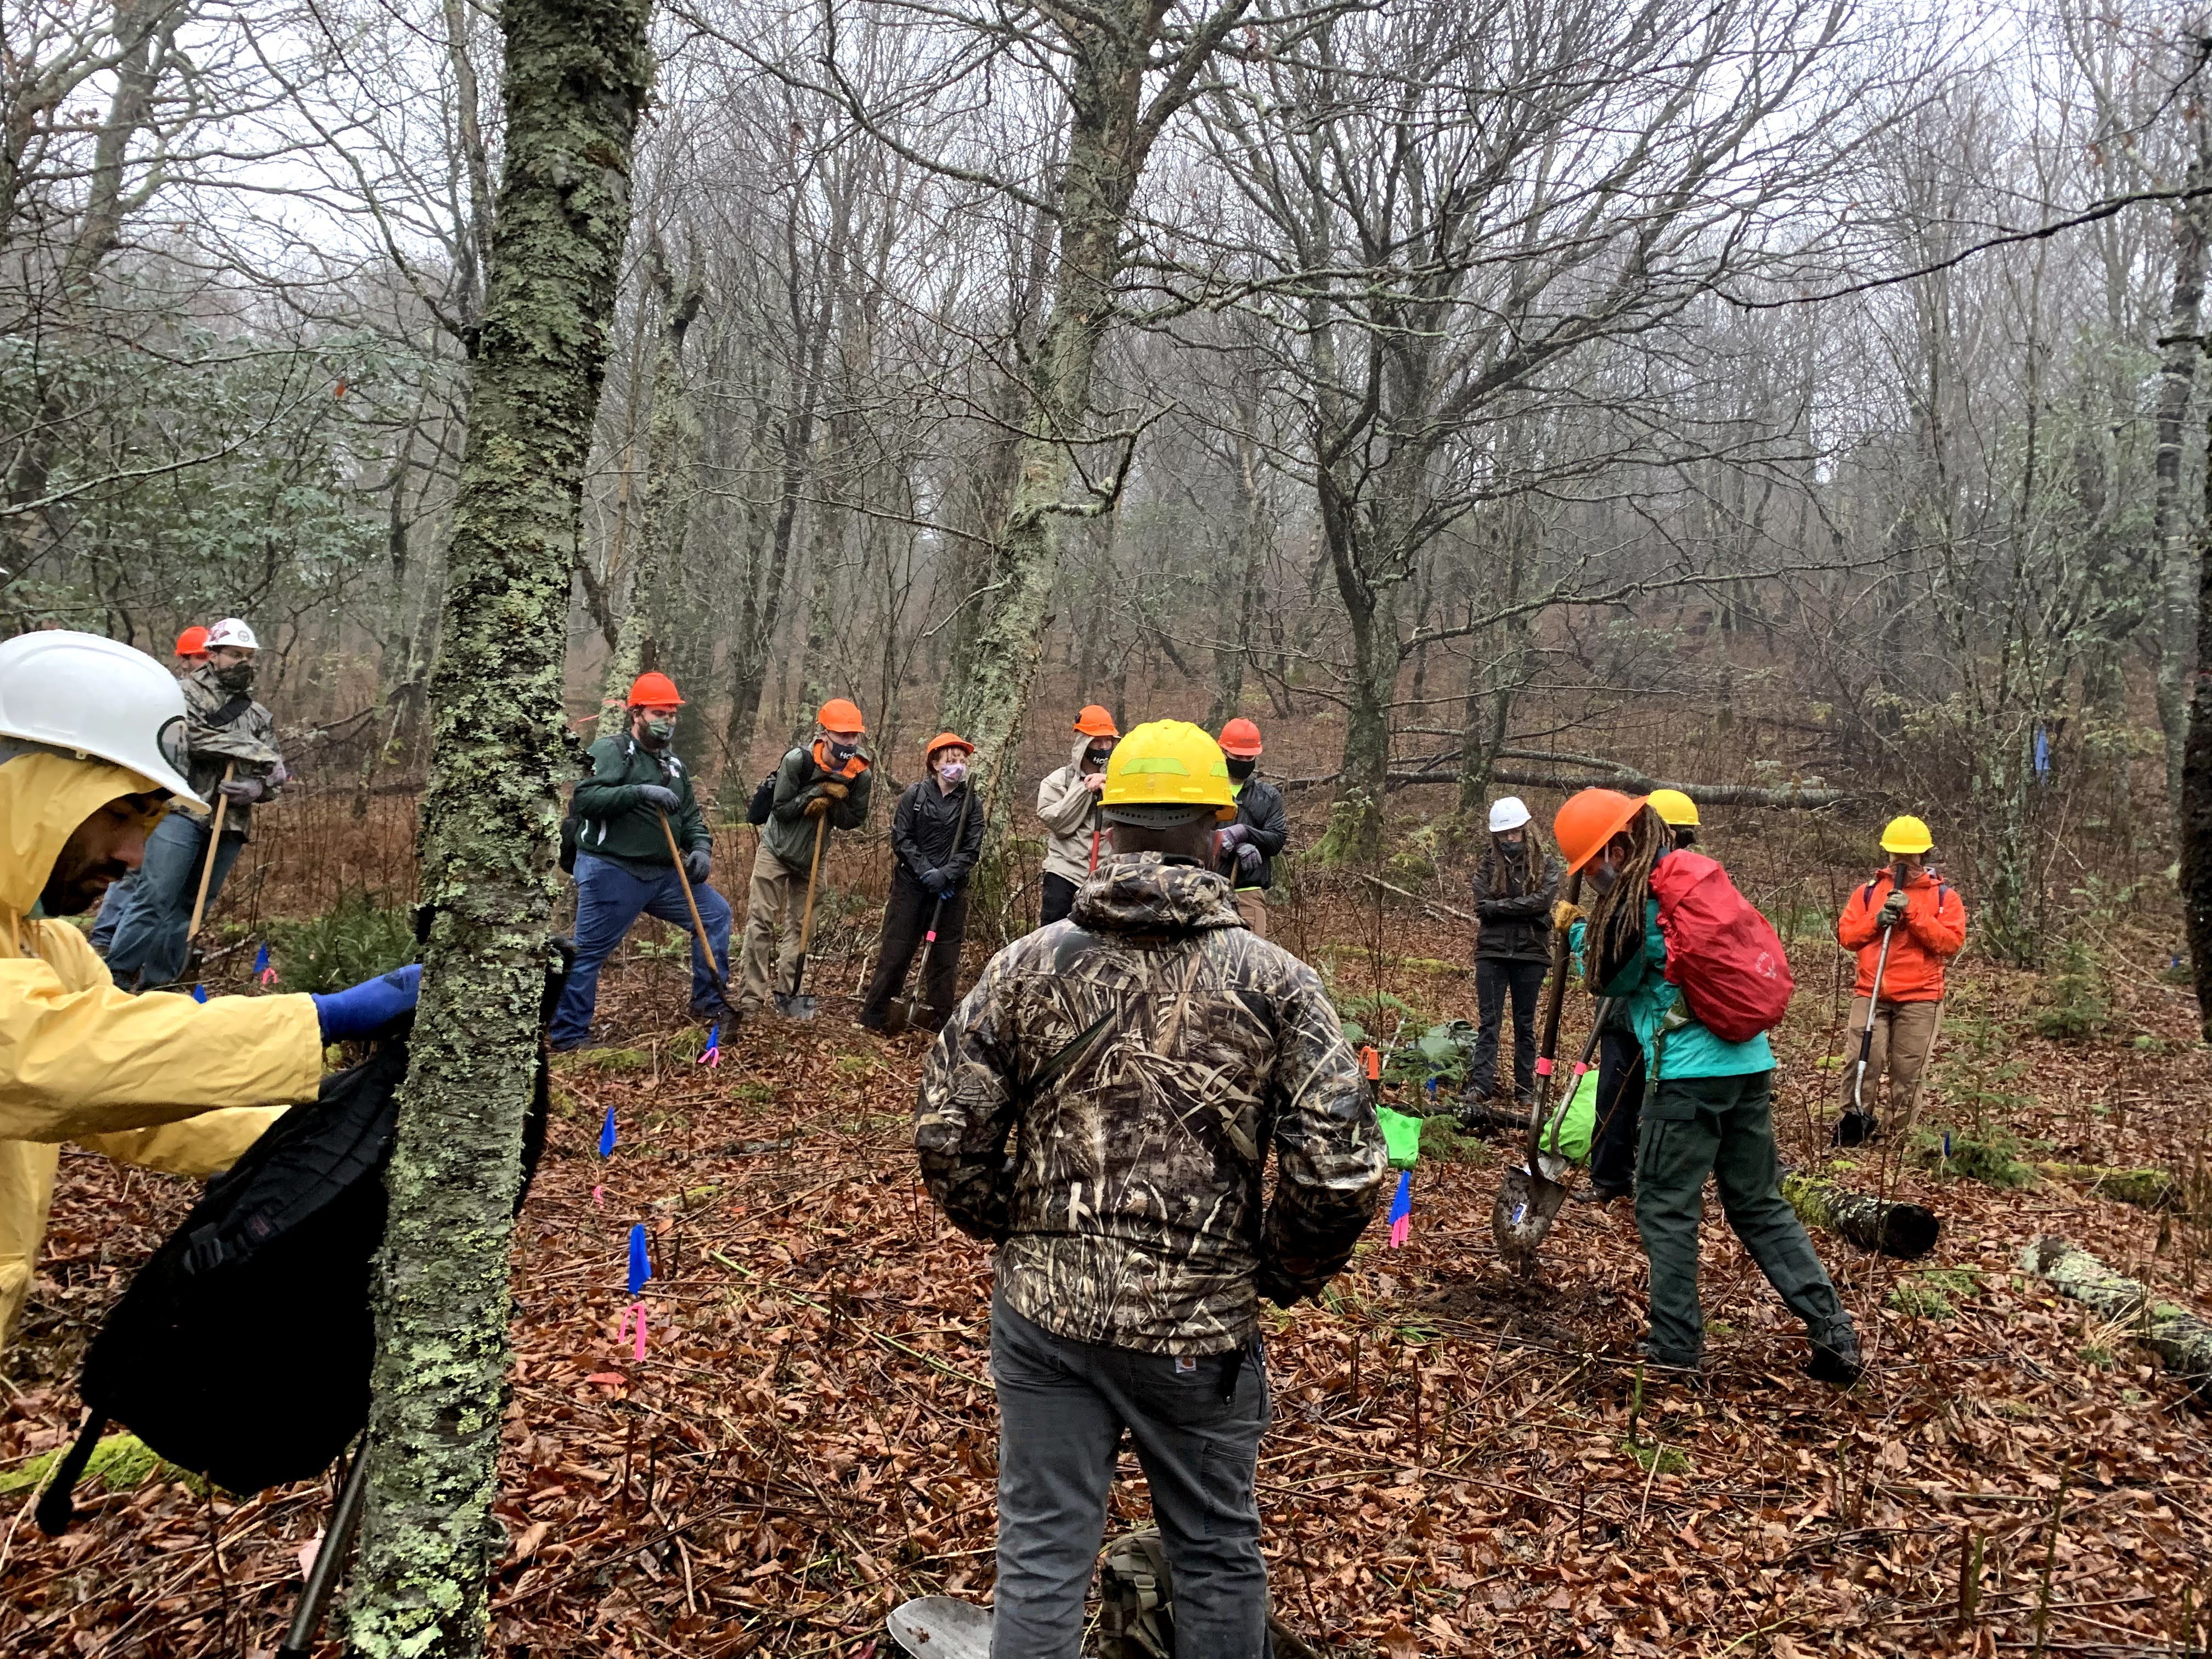 students with hardhats walking through forest